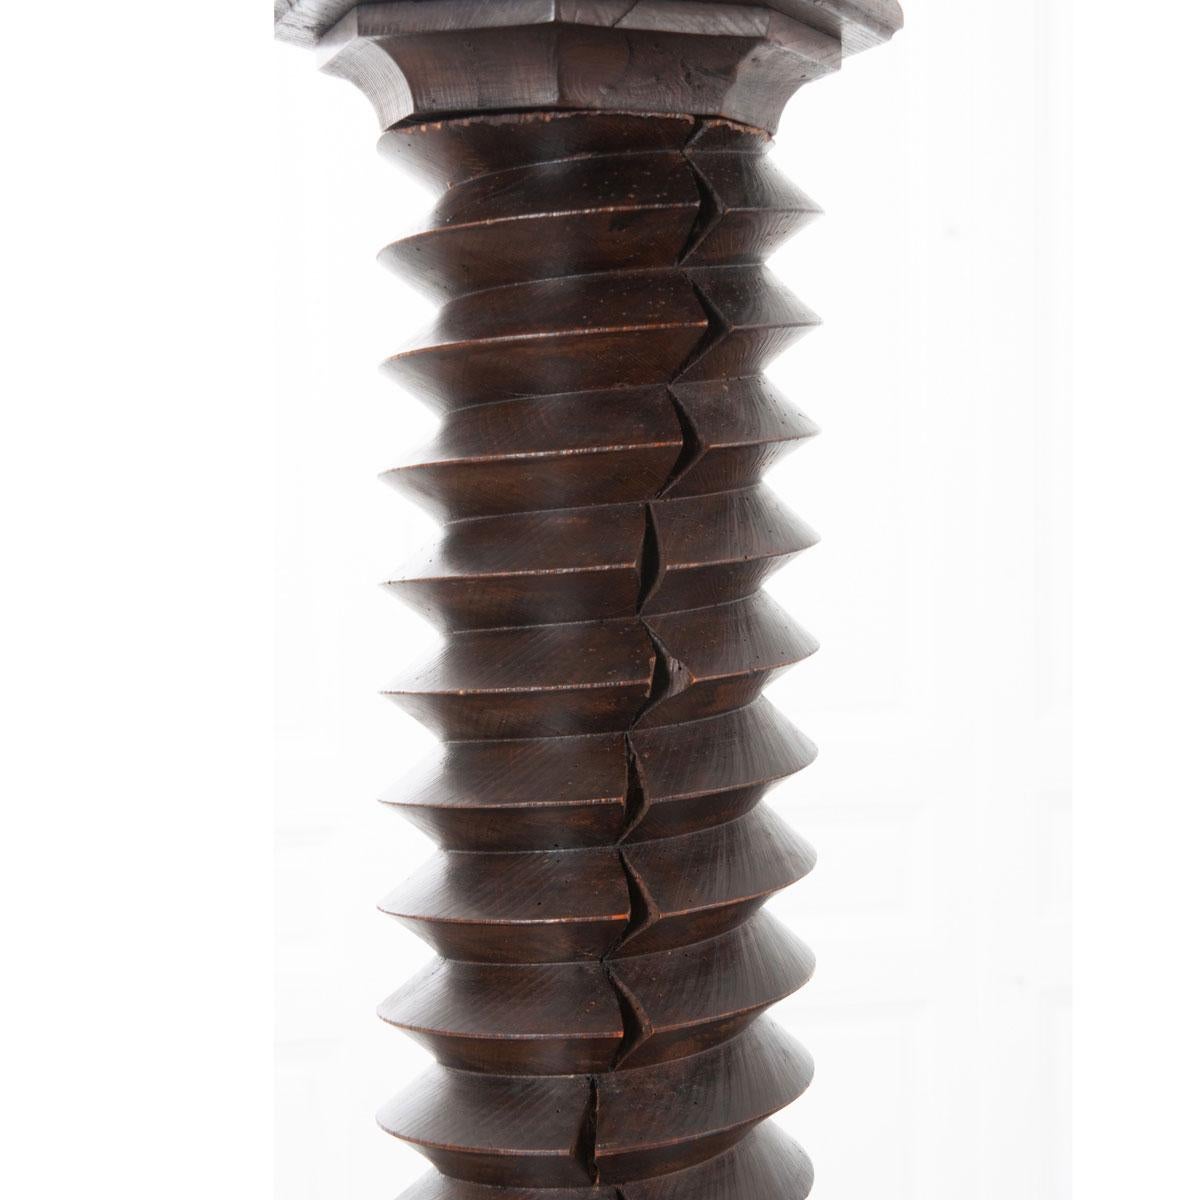 This wonderfully aged 19th century grape press screw - from a winery in Burgundy, France - has been converted into a pedestal with an octagonal top and base added later. The shaft would have driven a large stone wheel downward, crushing and